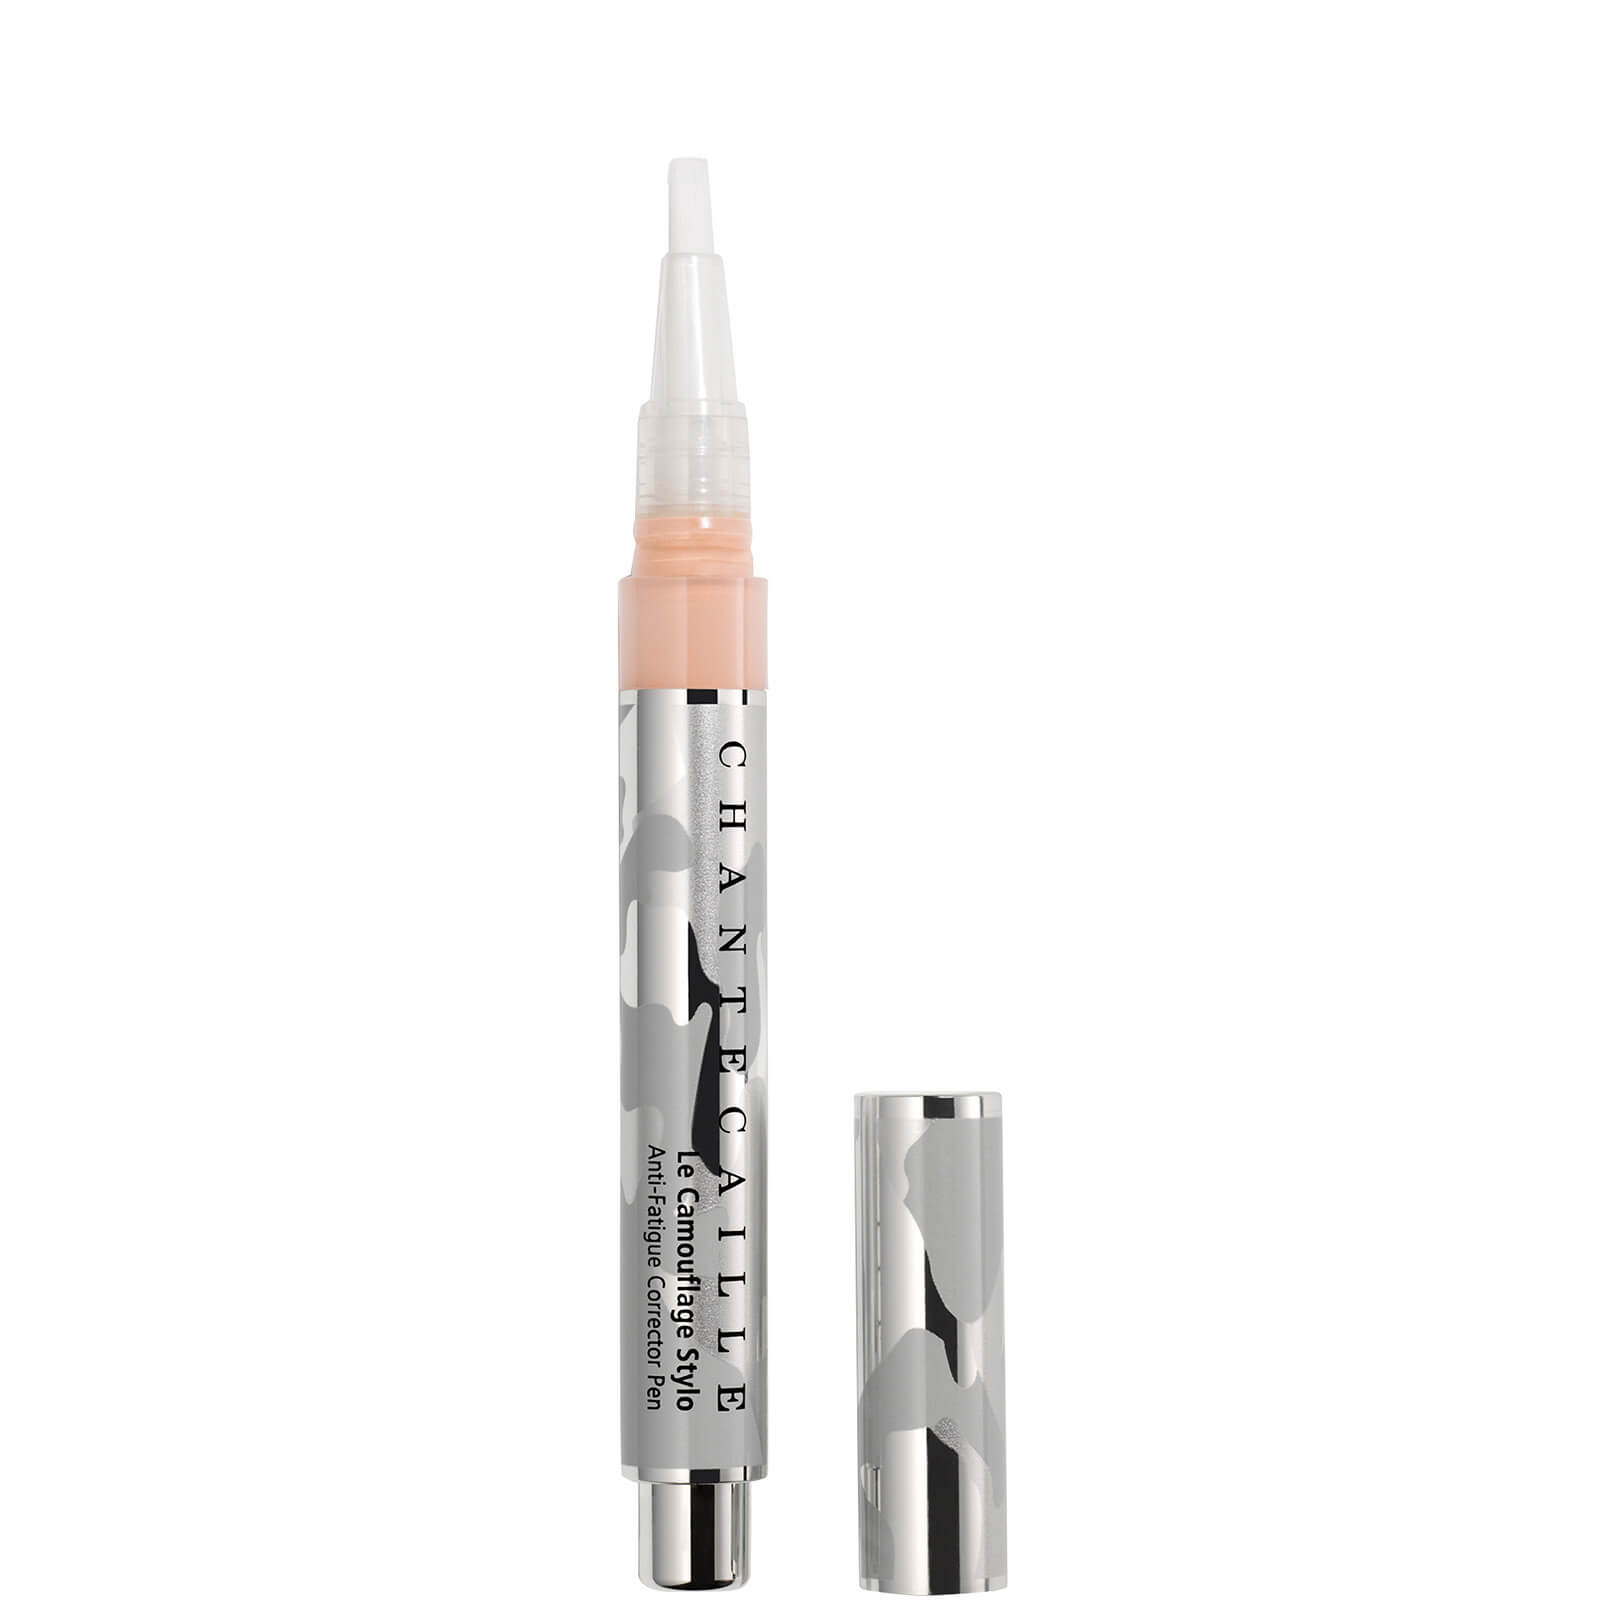 Chantecaille Le Camouflage Stylo Concealer - #2